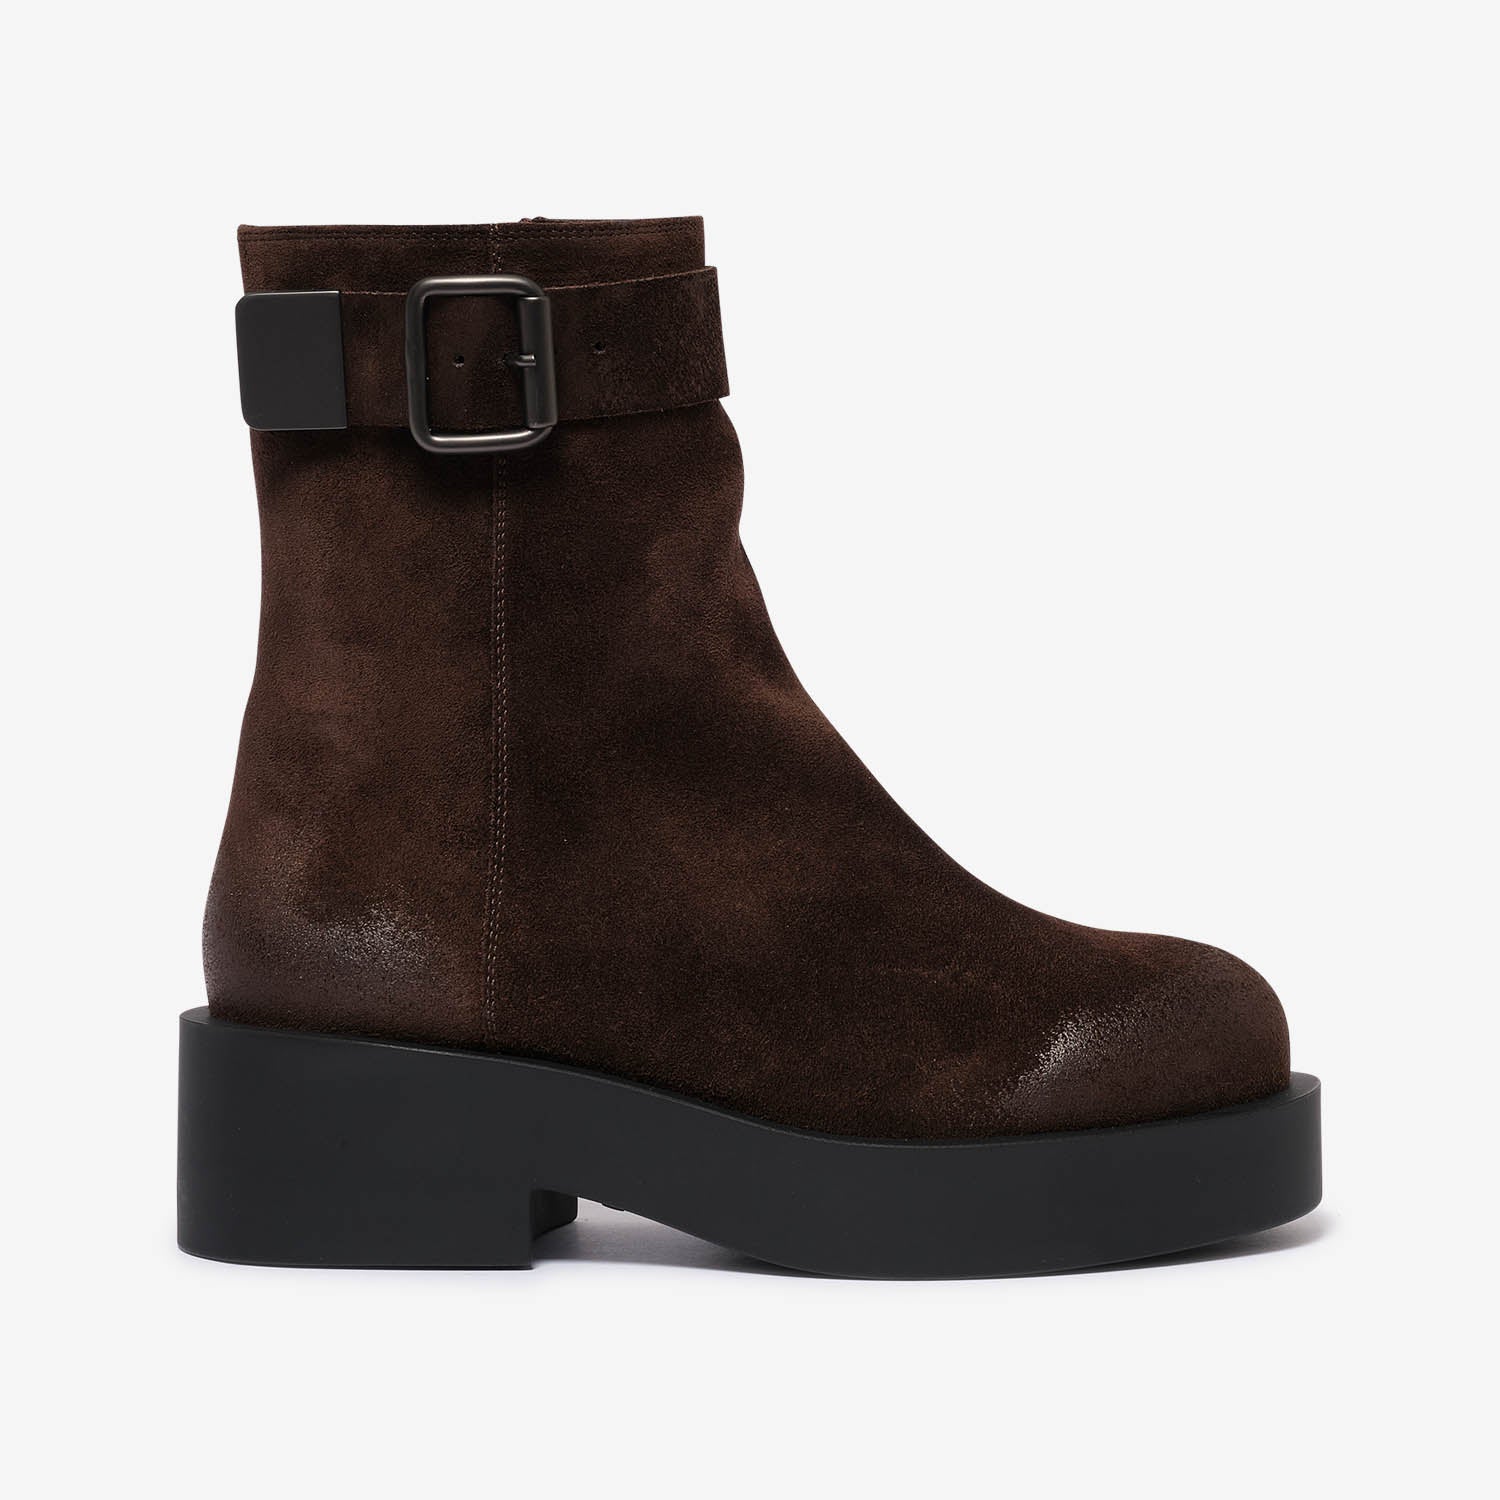 Marcia | Women's suede ankle boot